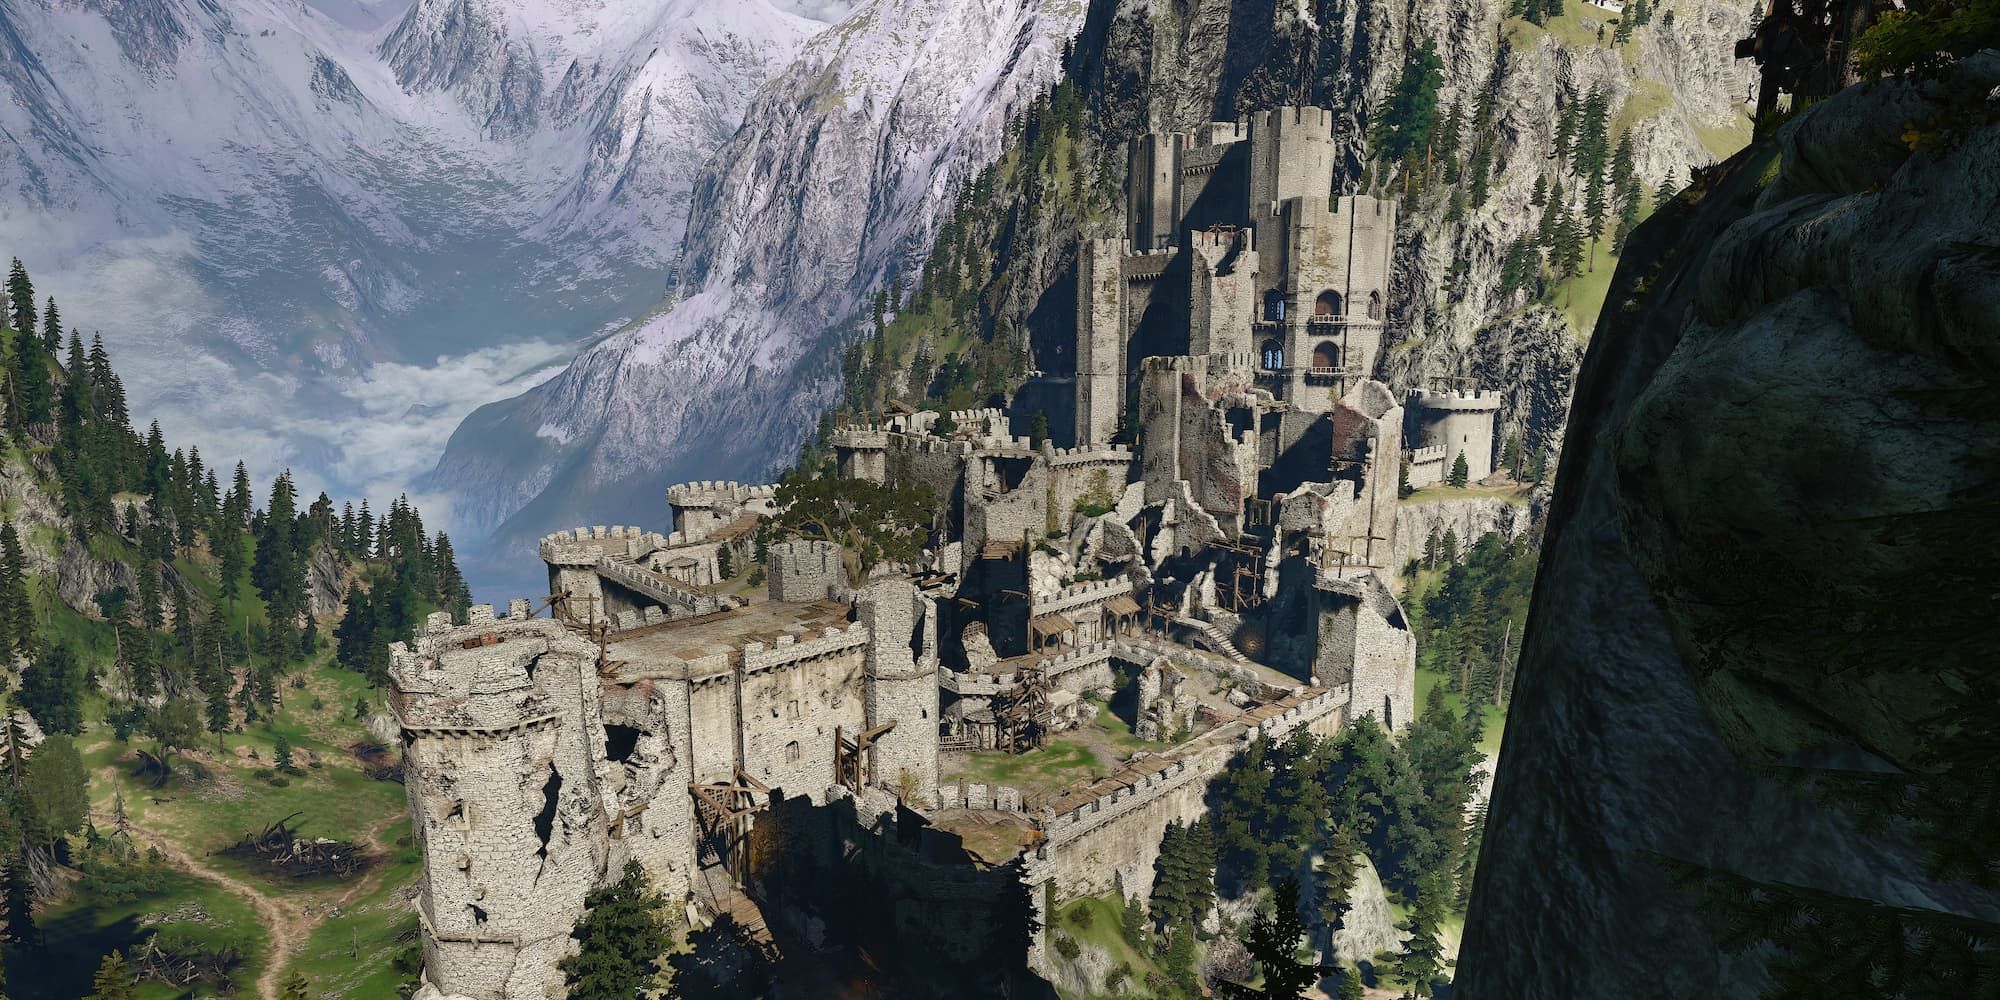 Screenshot of Kaer Morhen from the Witcher 3